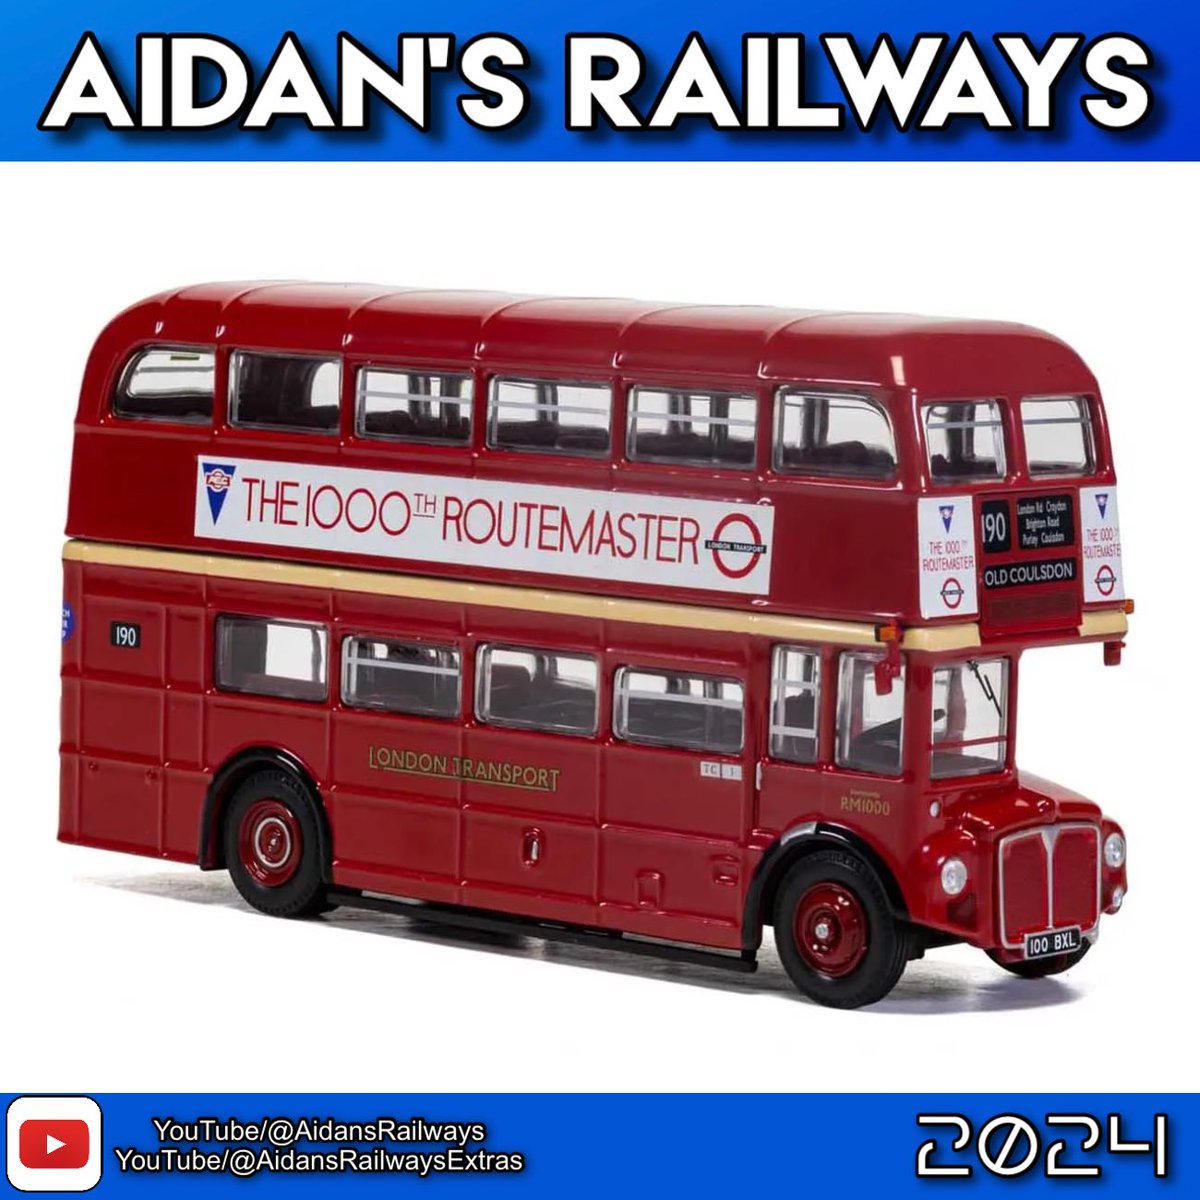 AEC RM 1000th Routemaster 1:76 scale. 
Purchase yours here 👉: prf.hn/l/Oqyn5ej

#diecastcollector #diecastmodel #diecast #planes #cars #classiccars #classiccar #car #modelrailway #modeltrains #trains #railway #hornbytrains #modelrailways #modeltrain #modelrailroad #train